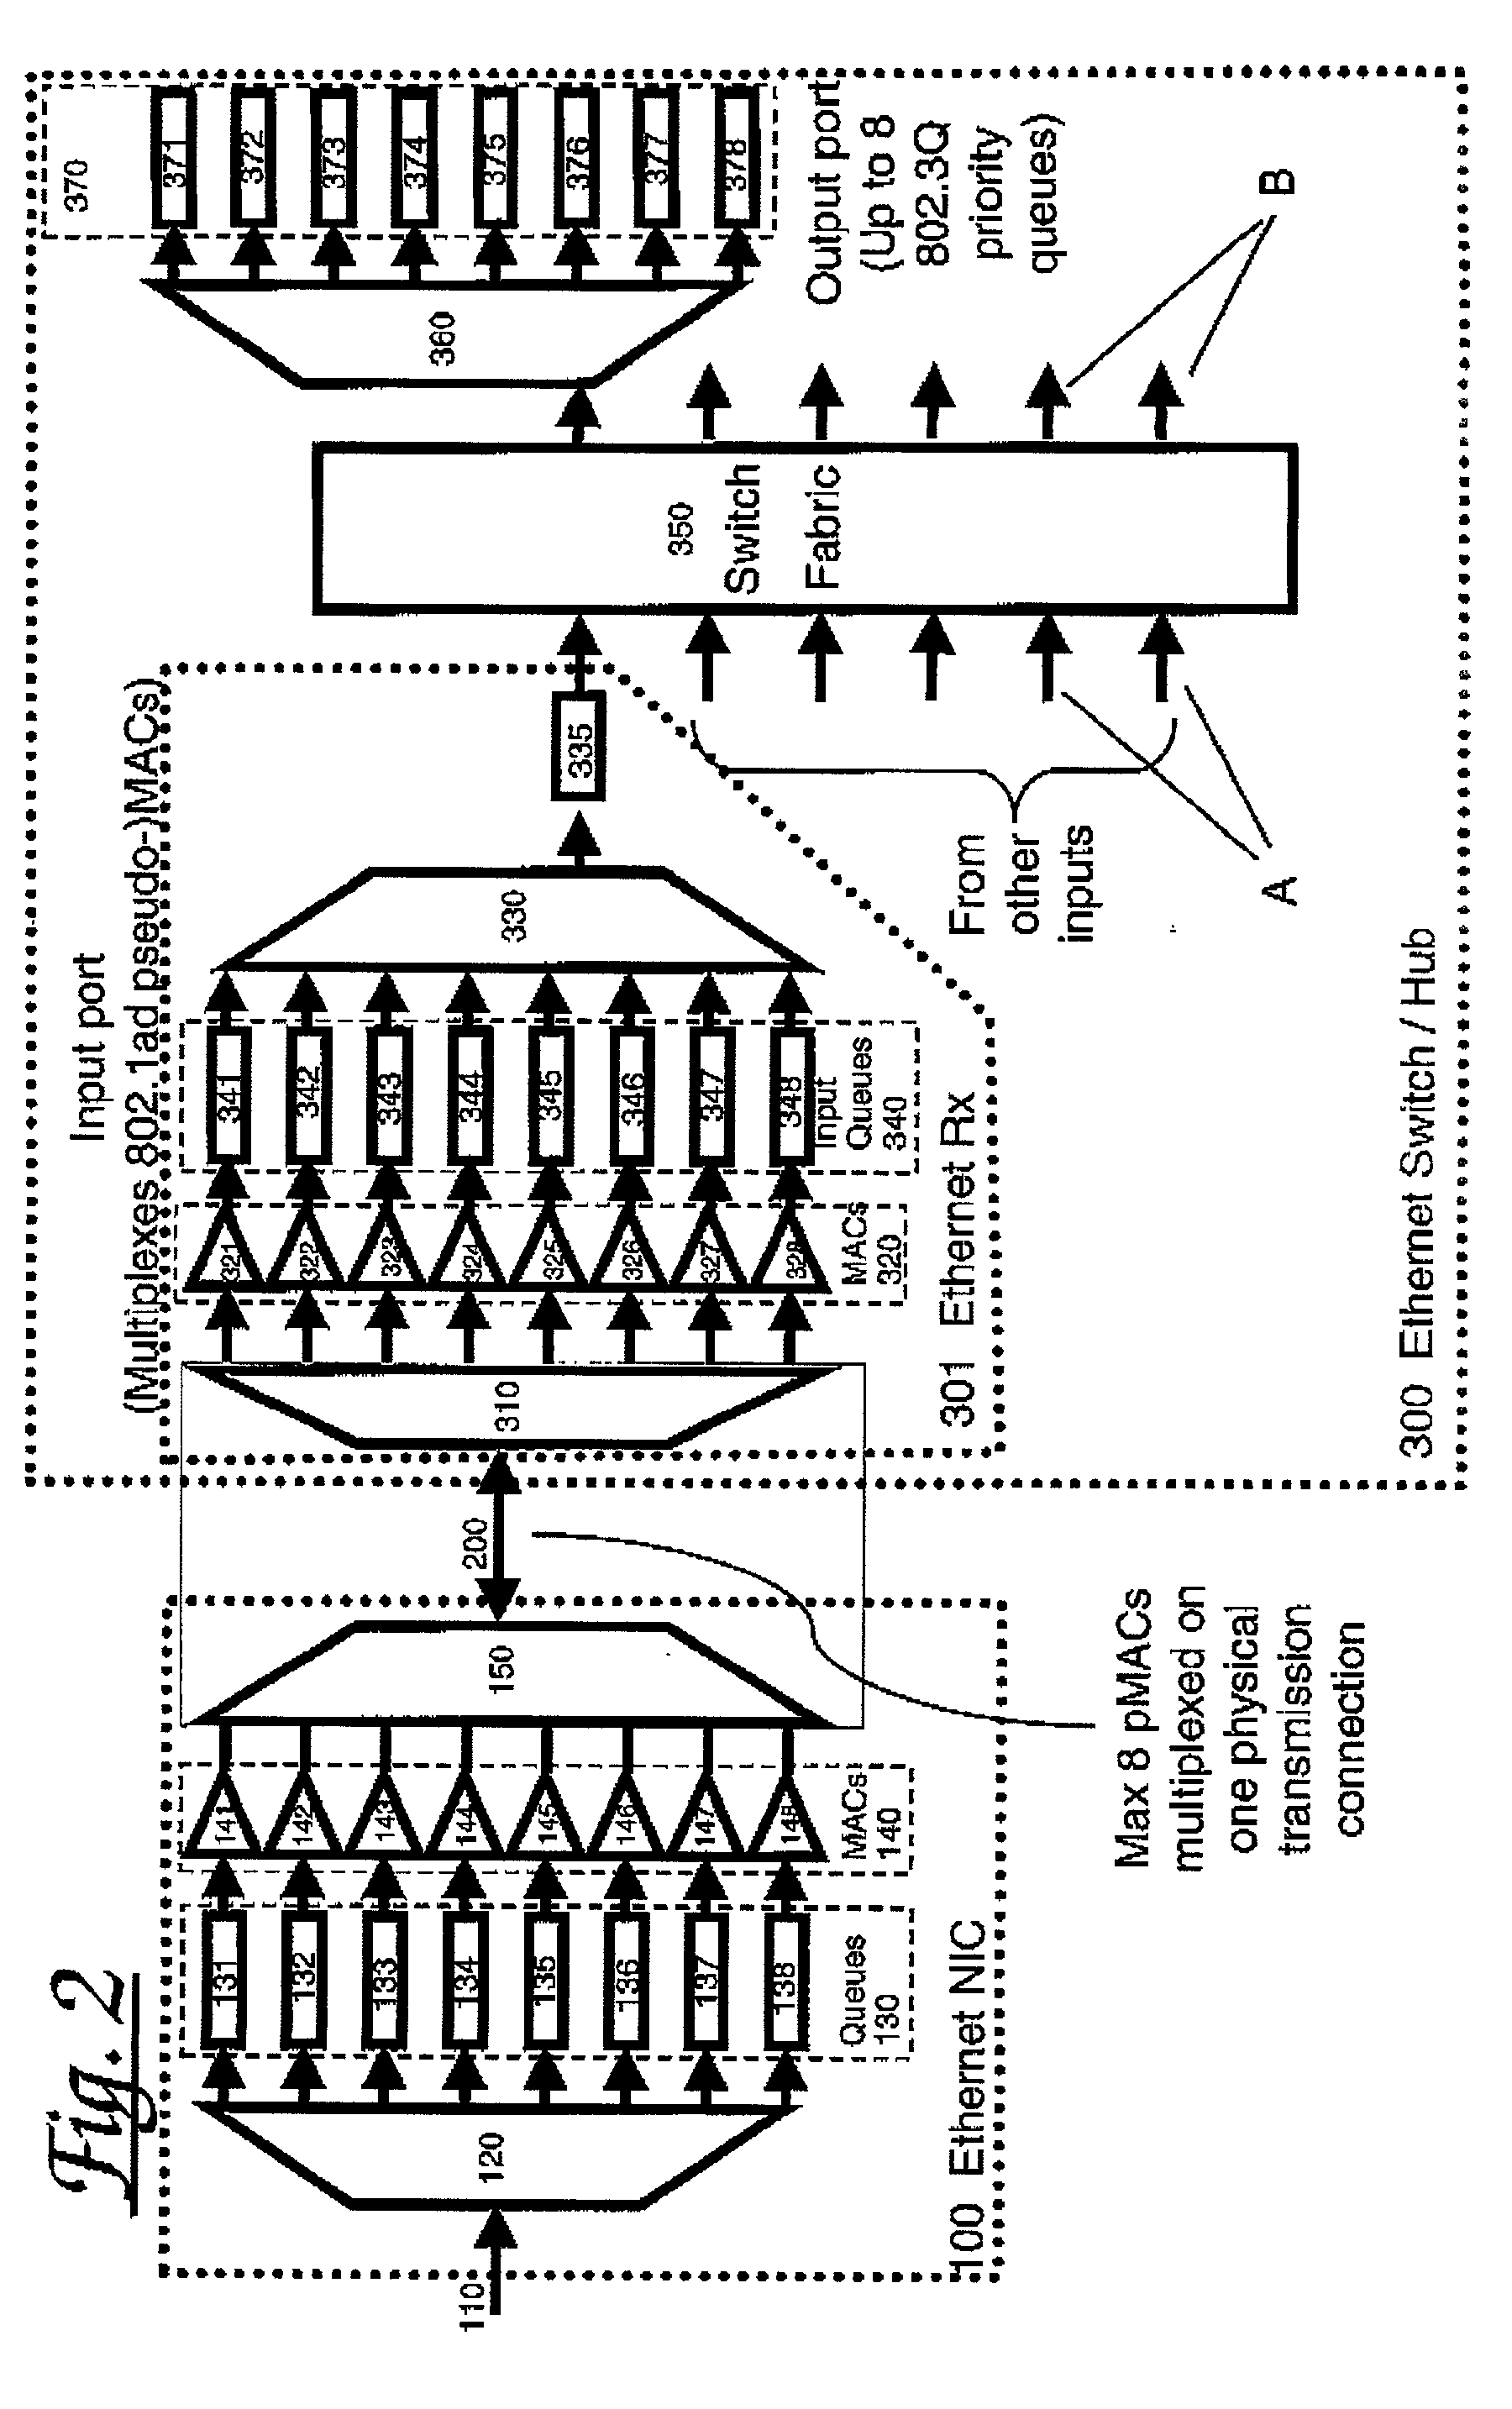 Flow control and quality of service provision for frame relay protocols